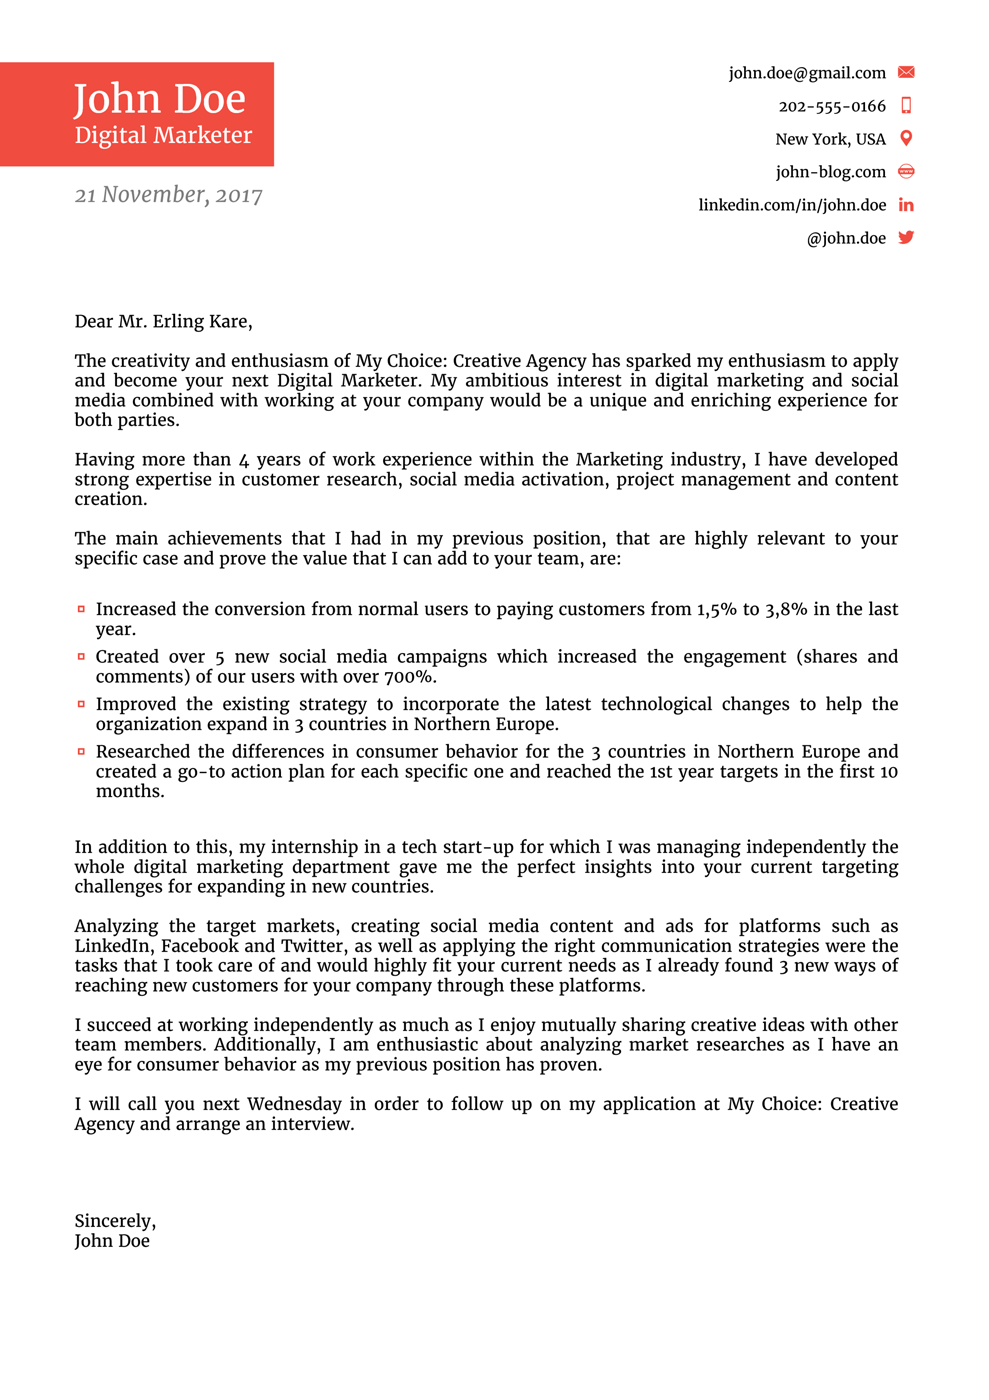 Cover letter physics phd